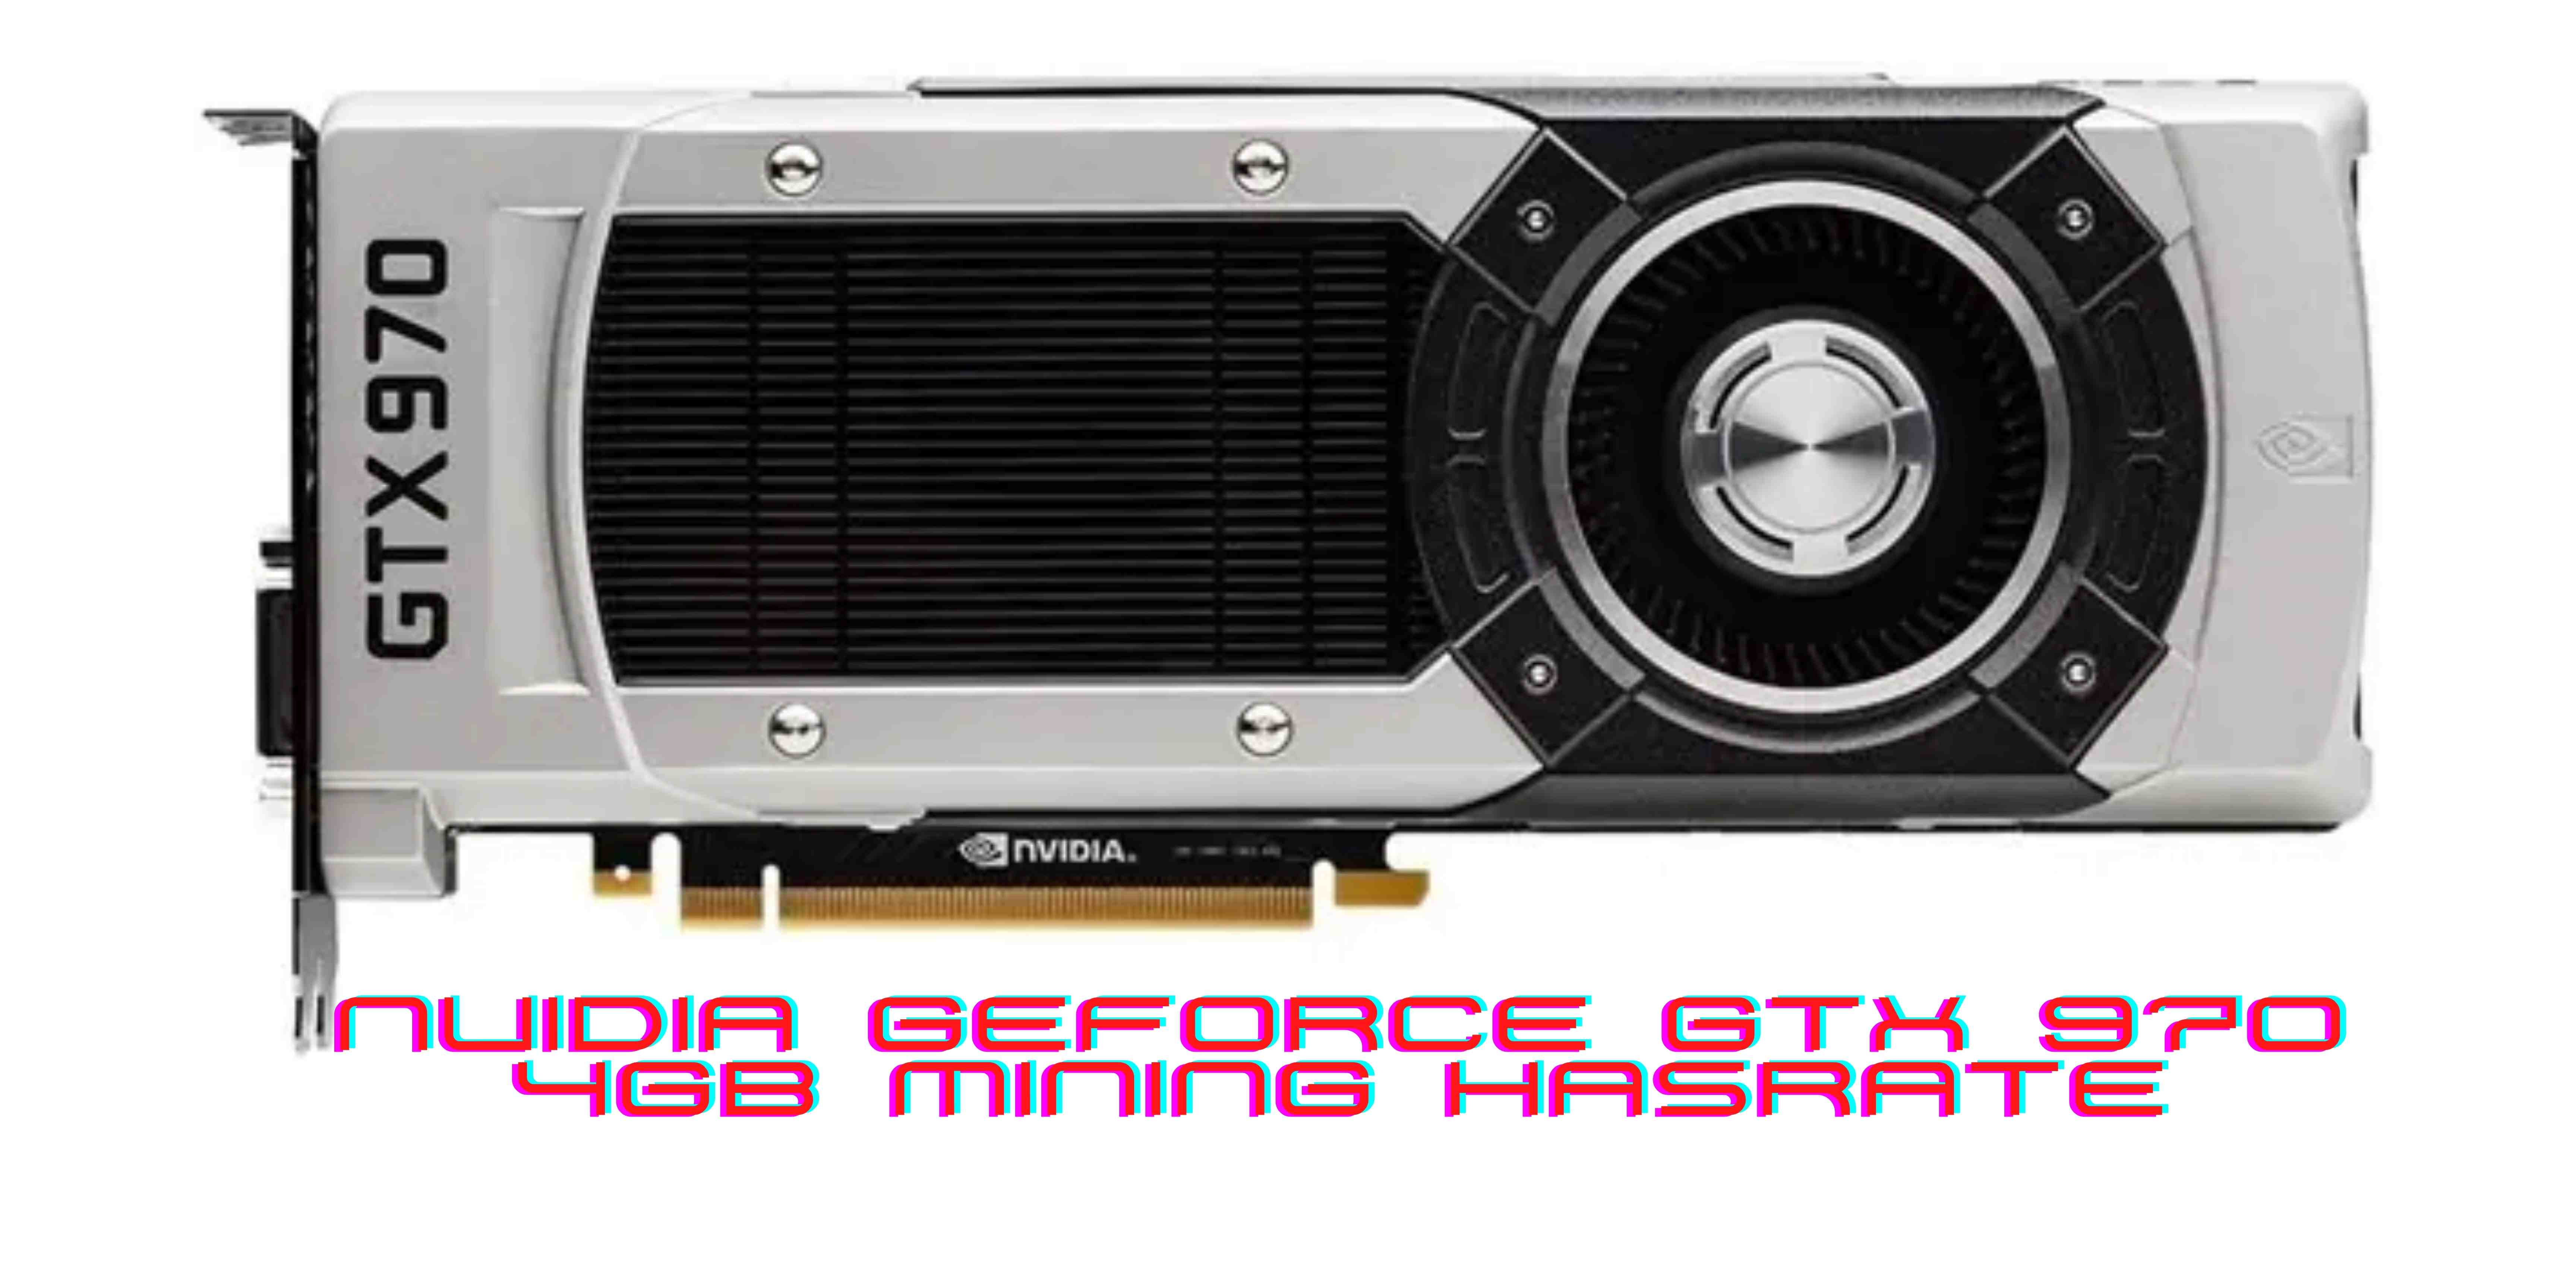 Why Is The NVIDIA GeForce 4GB GTX 970 Mining Hasrate Not Recommended For Miners?